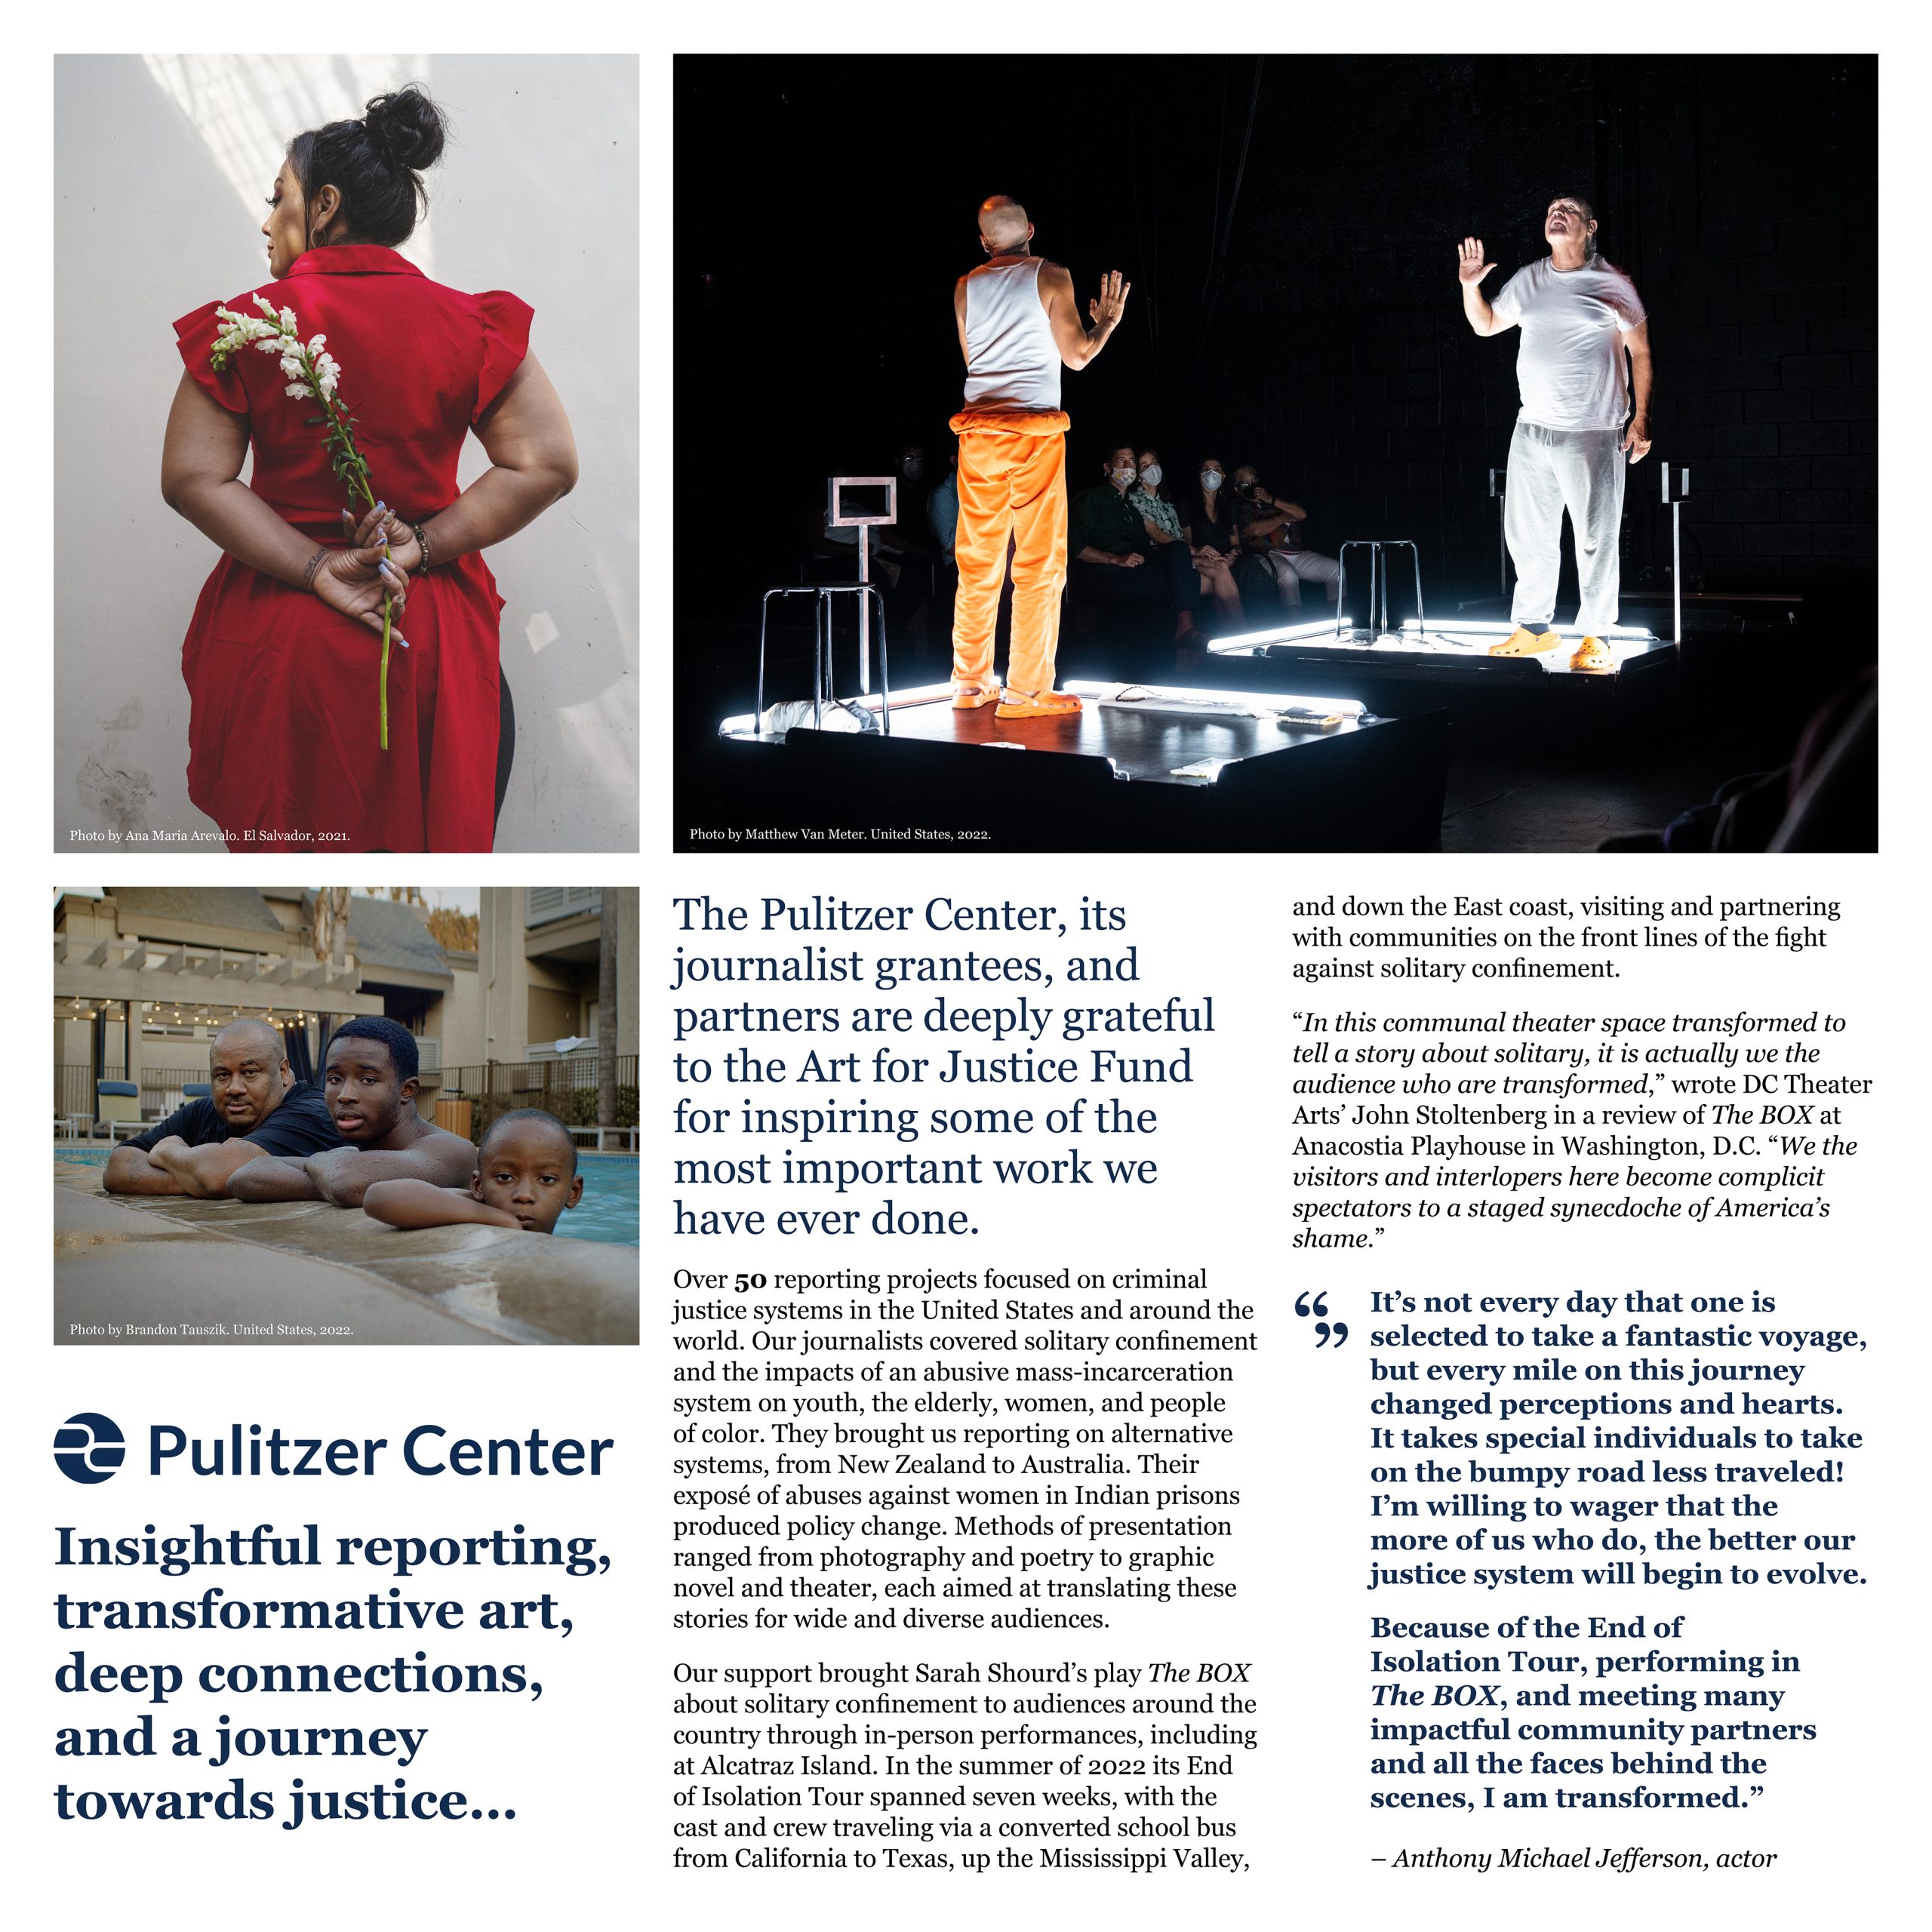 A graphic letter includes text from the Pulitzer Center expressing gratiftude to Art for Justice, with three photographs in highlight boxes: one of two actors in prison clothing in a performace of Sarah Shourd's 